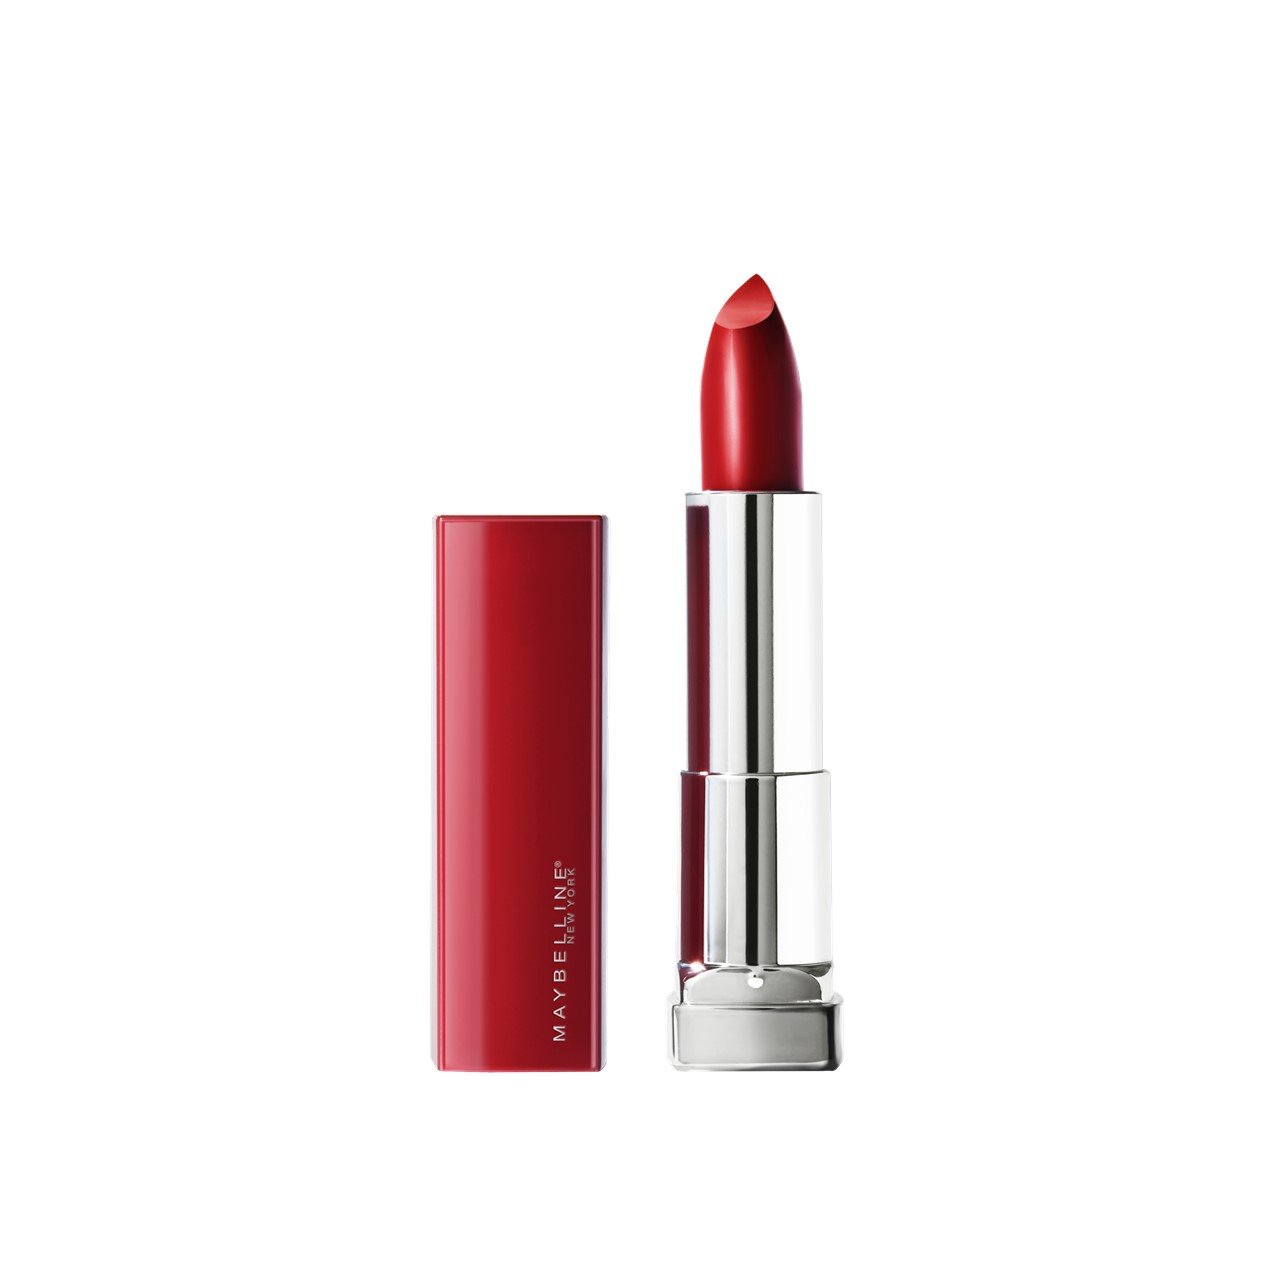 Maybelline Color Sensational Made For All Lipstick 385 Ruby For Me